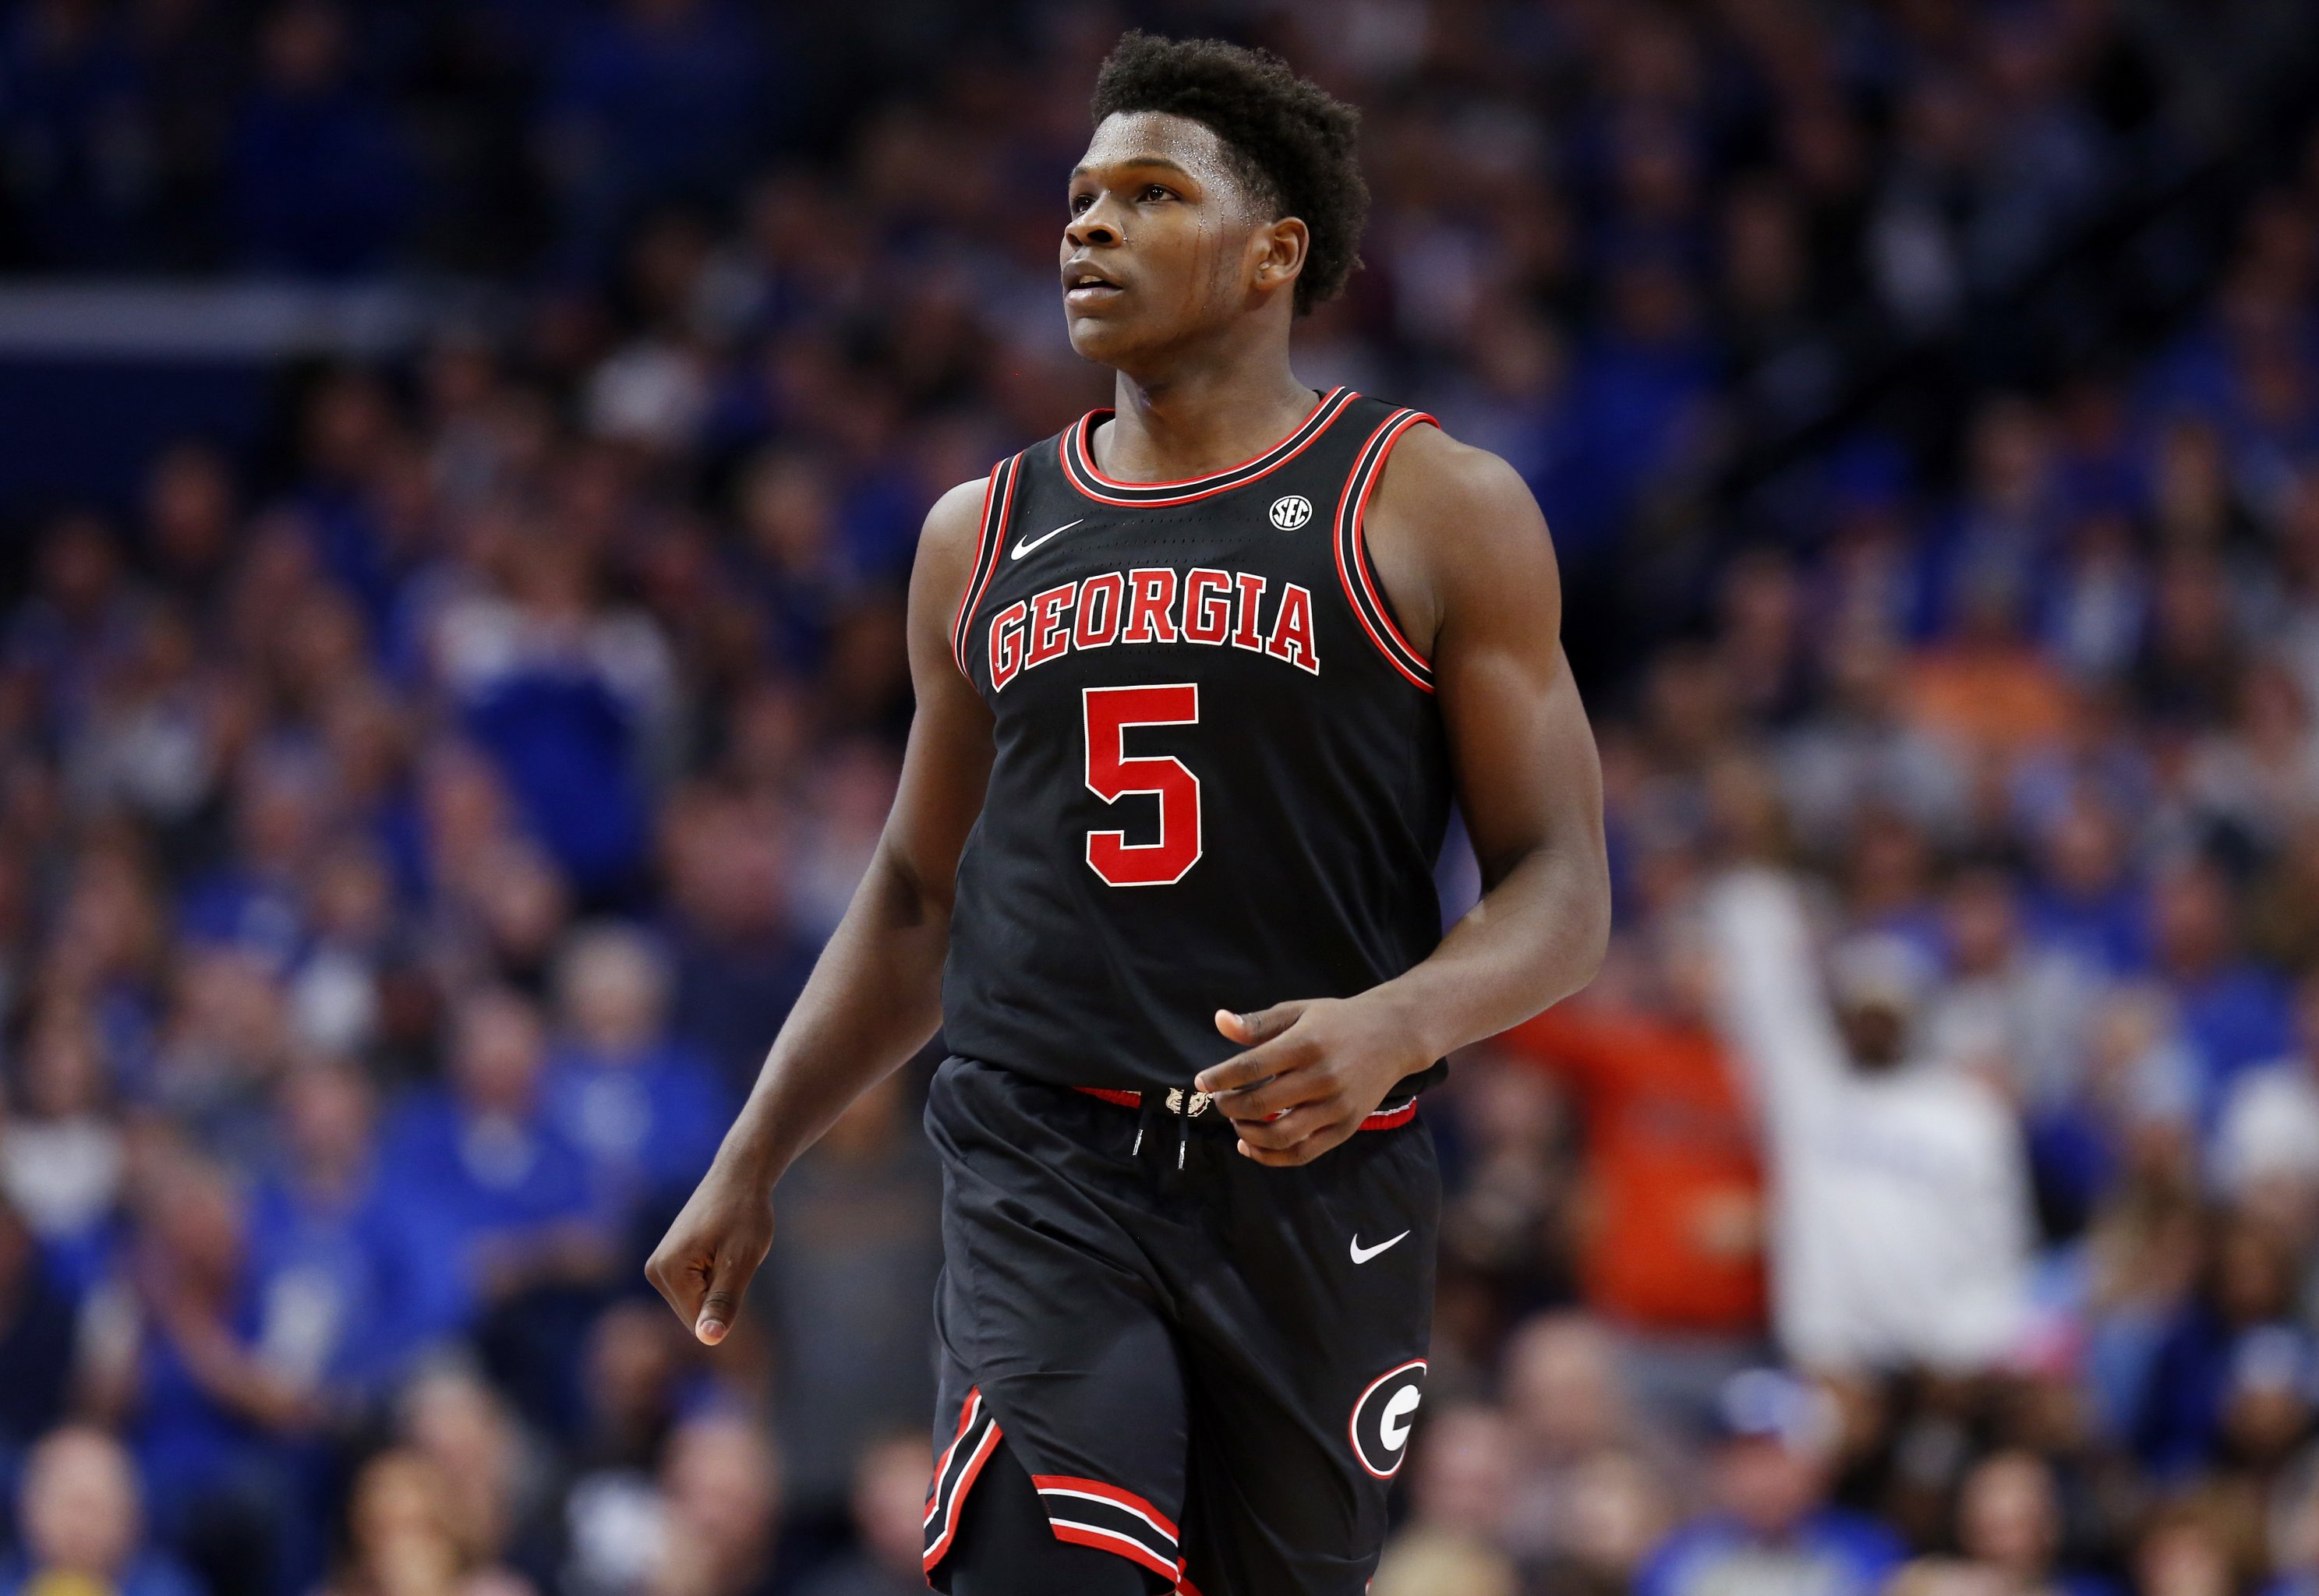 Five Prospects Lakers Could Target In 2020 NBA Draft: Guards